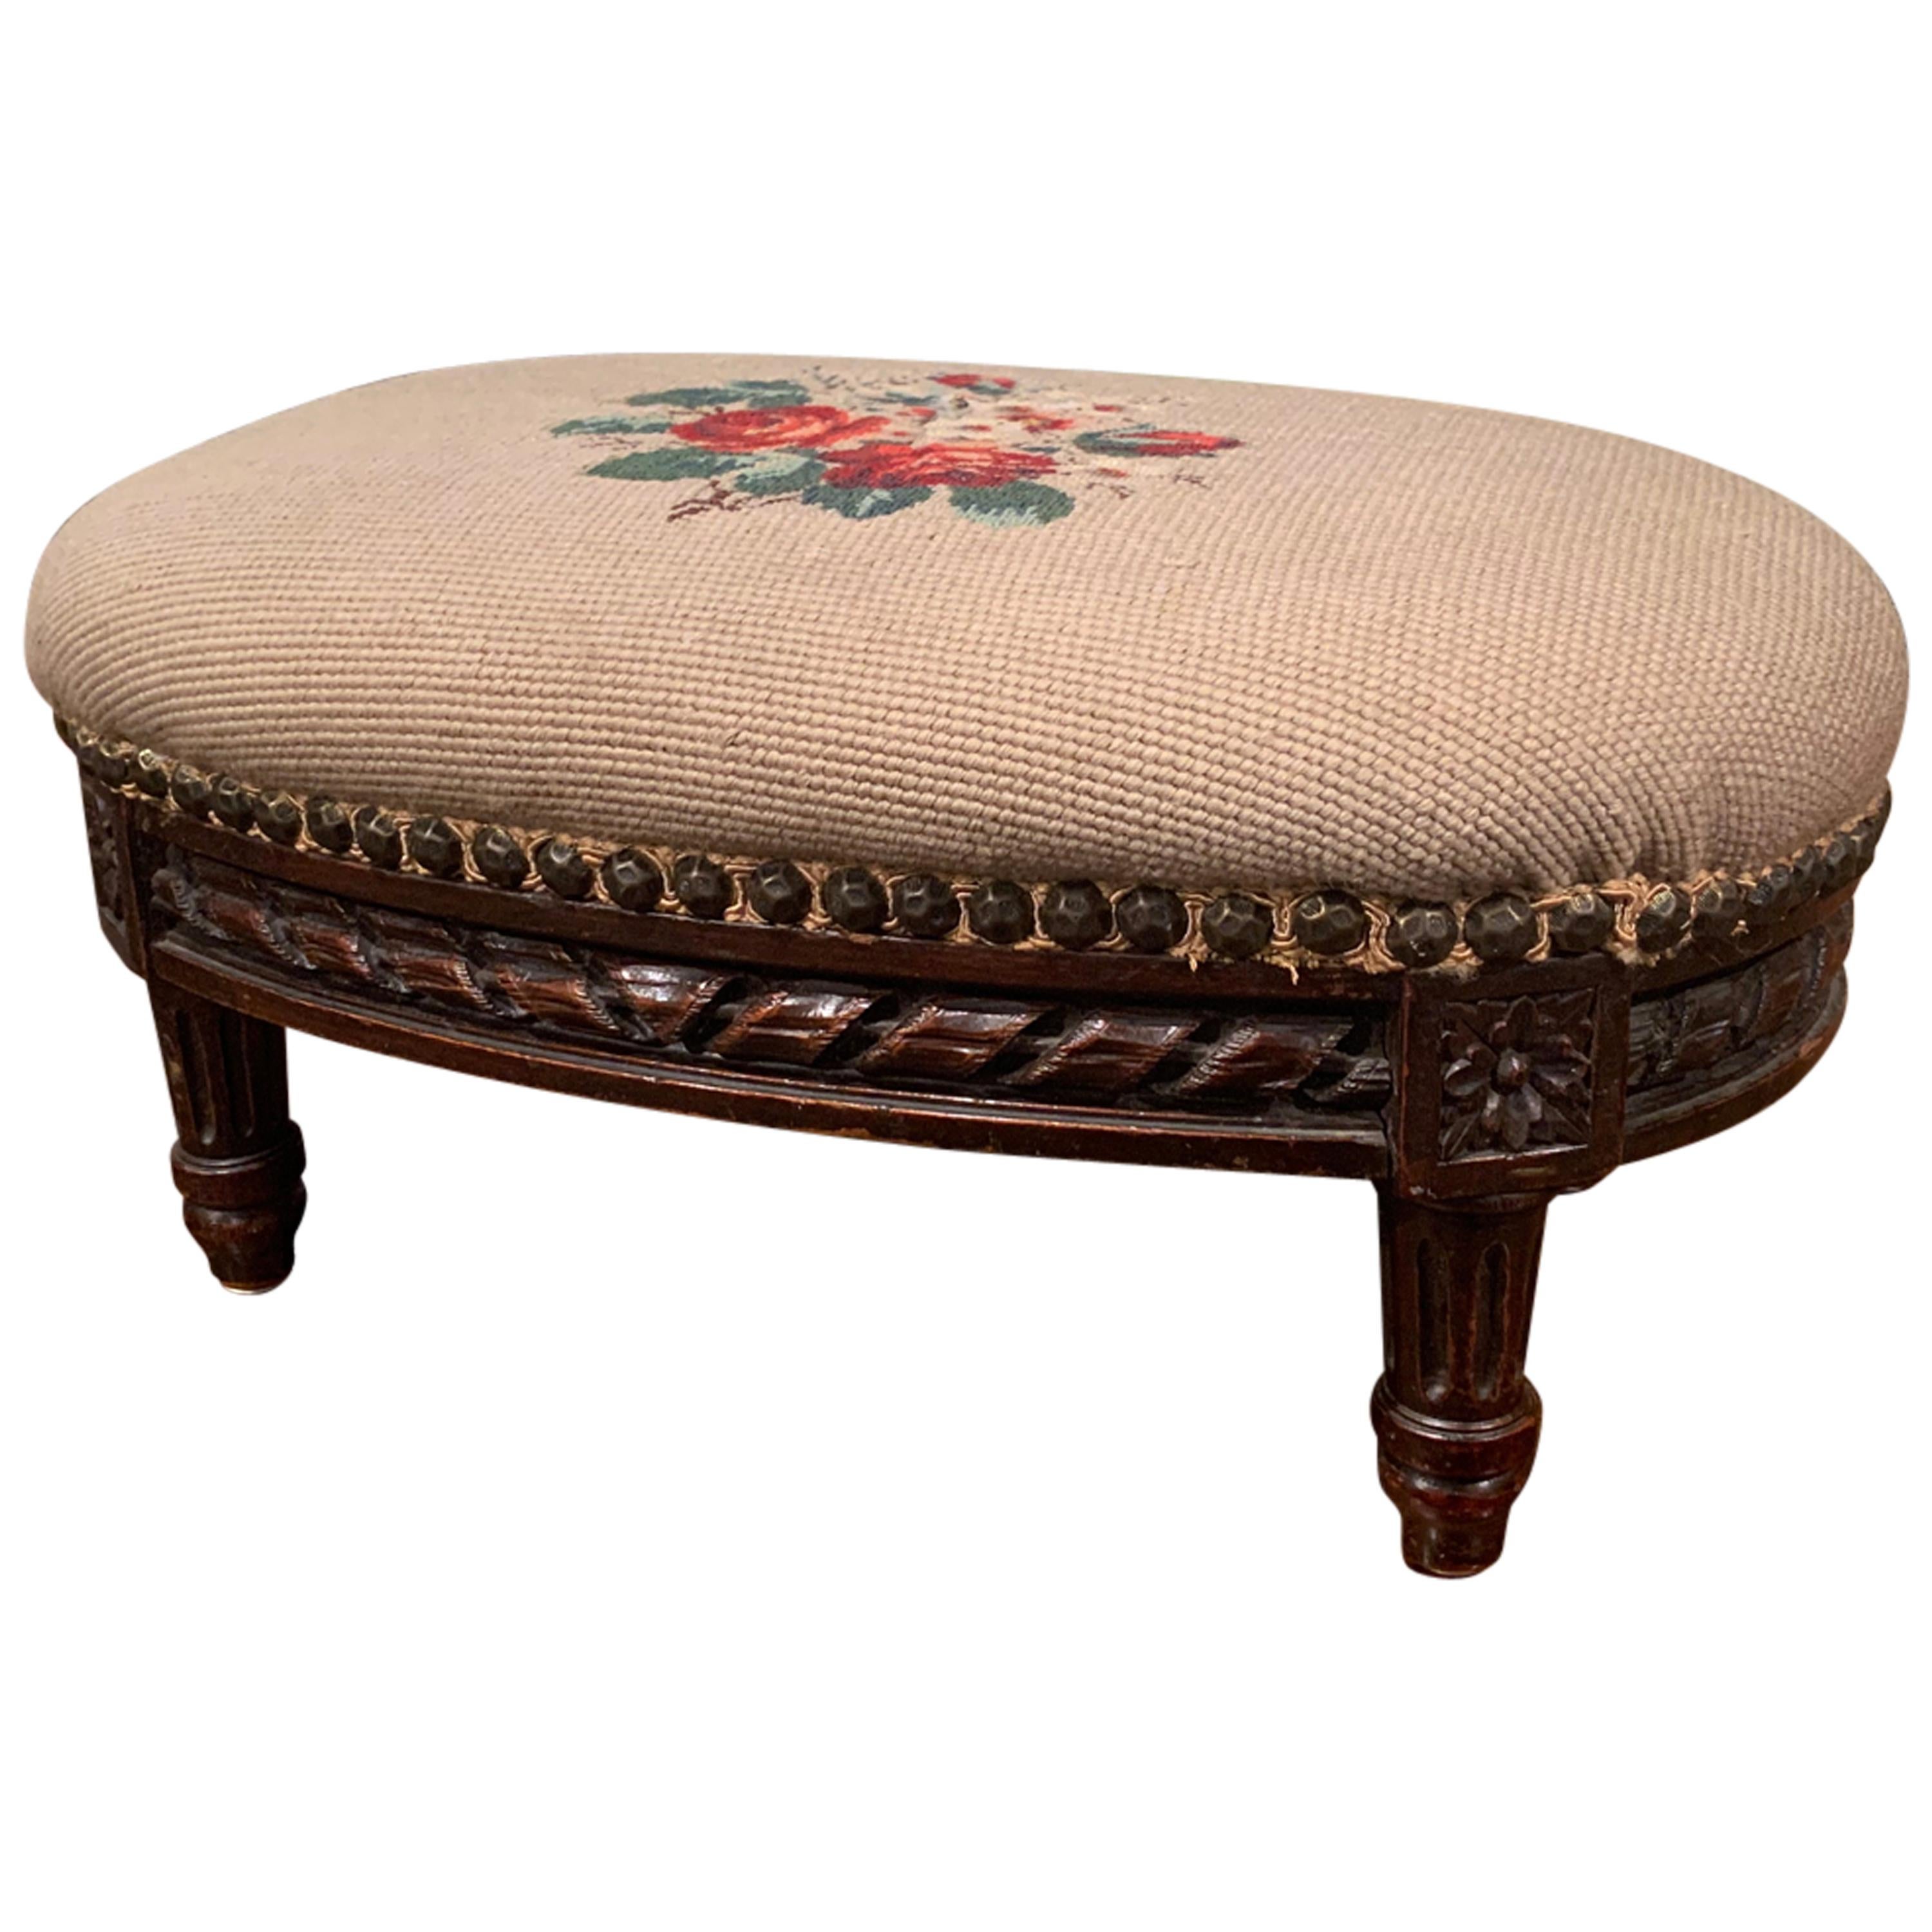 Early 20th Century French Walnut Footstool with Antique Needlepoint Tapestry